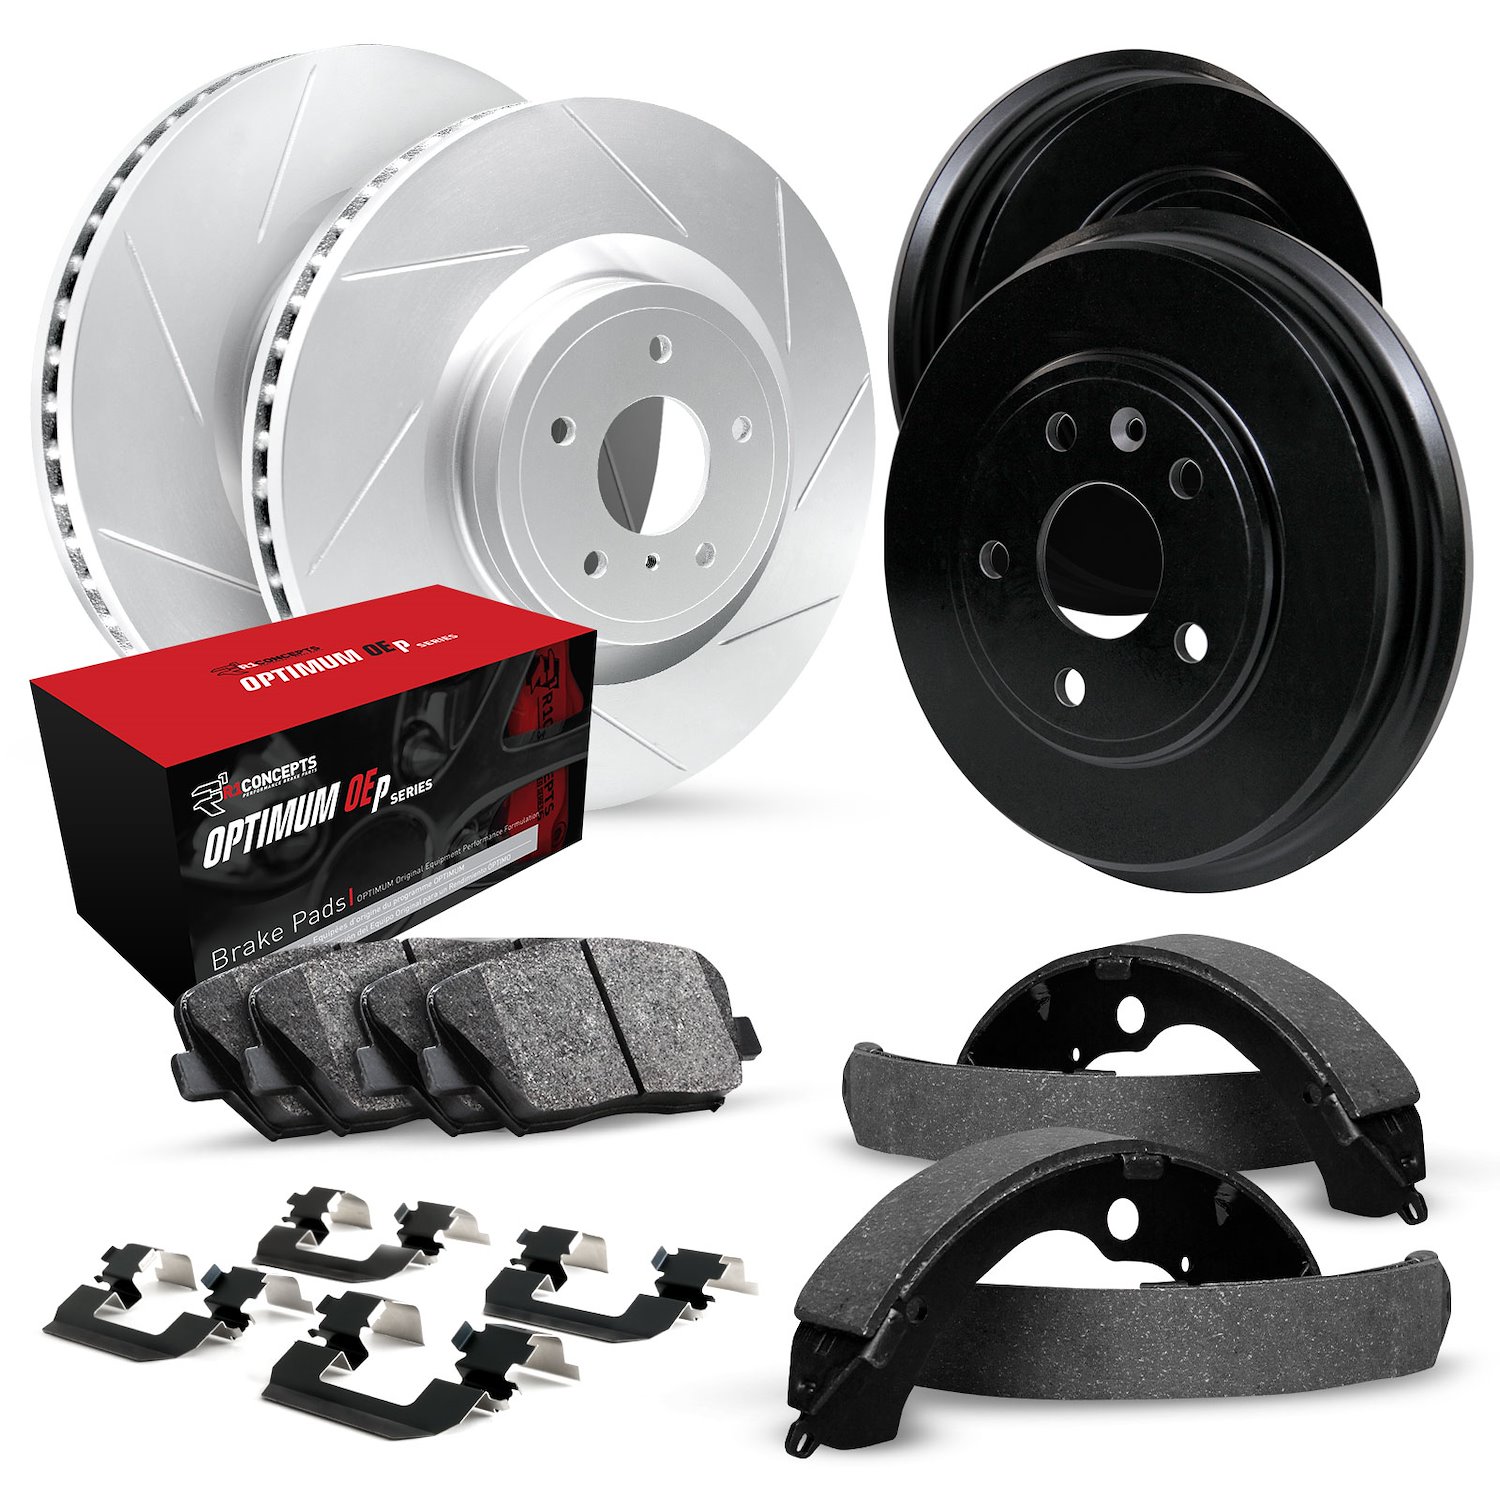 GEO-Carbon Slotted Brake Rotor & Drum Set w/Optimum OE Pads, Shoes, & Hardware, 1997-1999 Ford/Lincoln/Mercury/Mazda